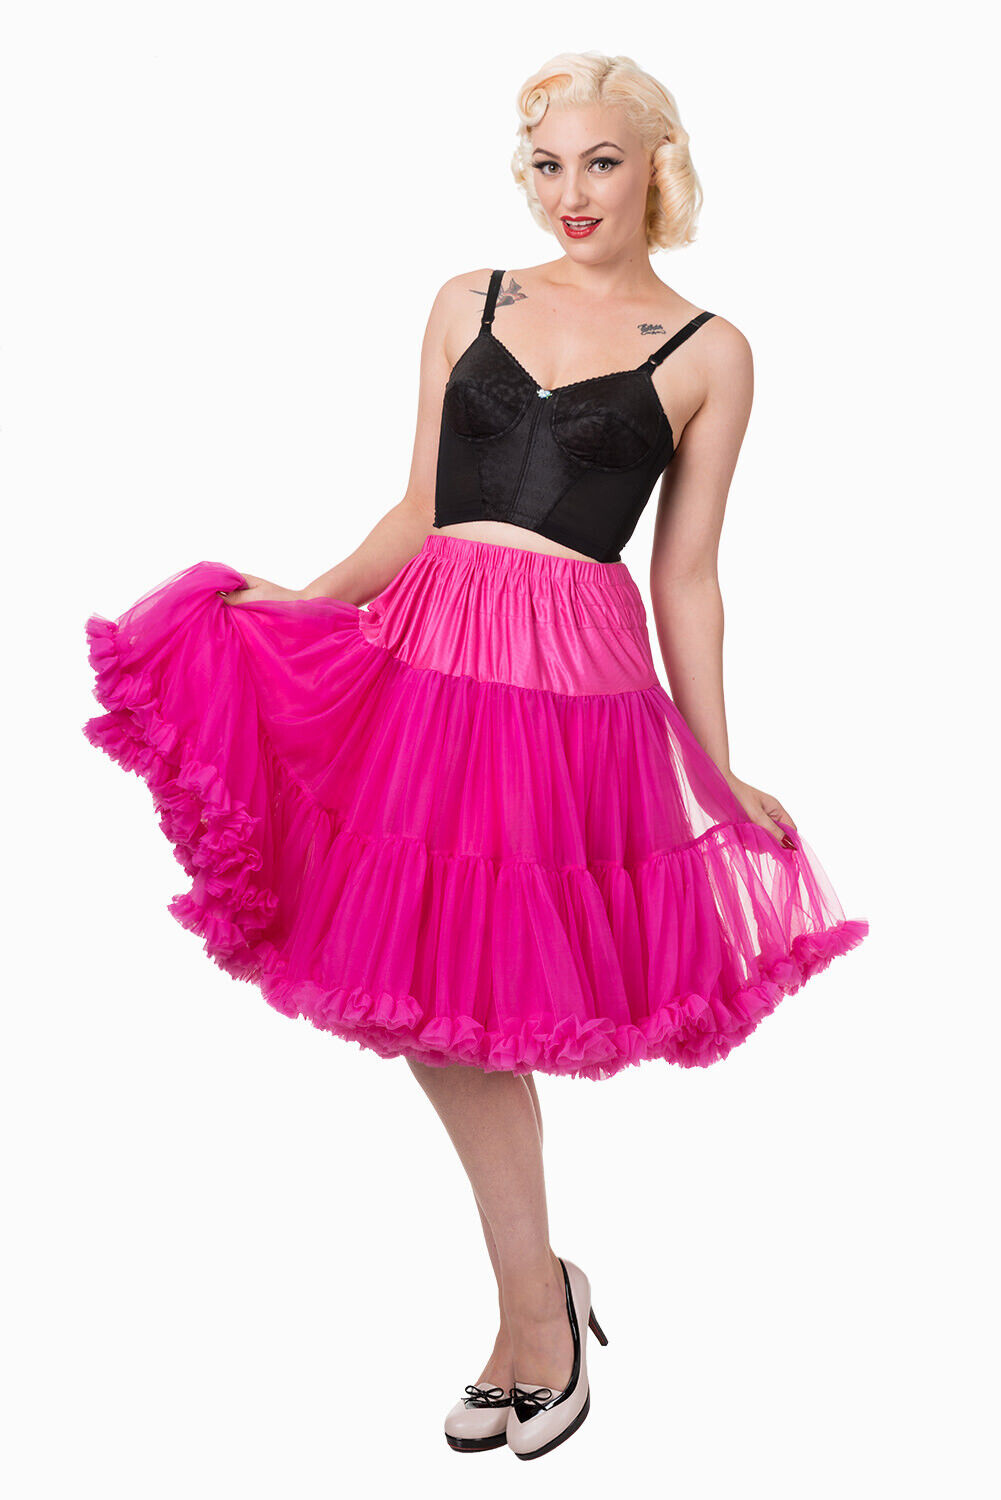 Dancing Days 50s Style 25"-27" Long Petticoat In Hot Pink